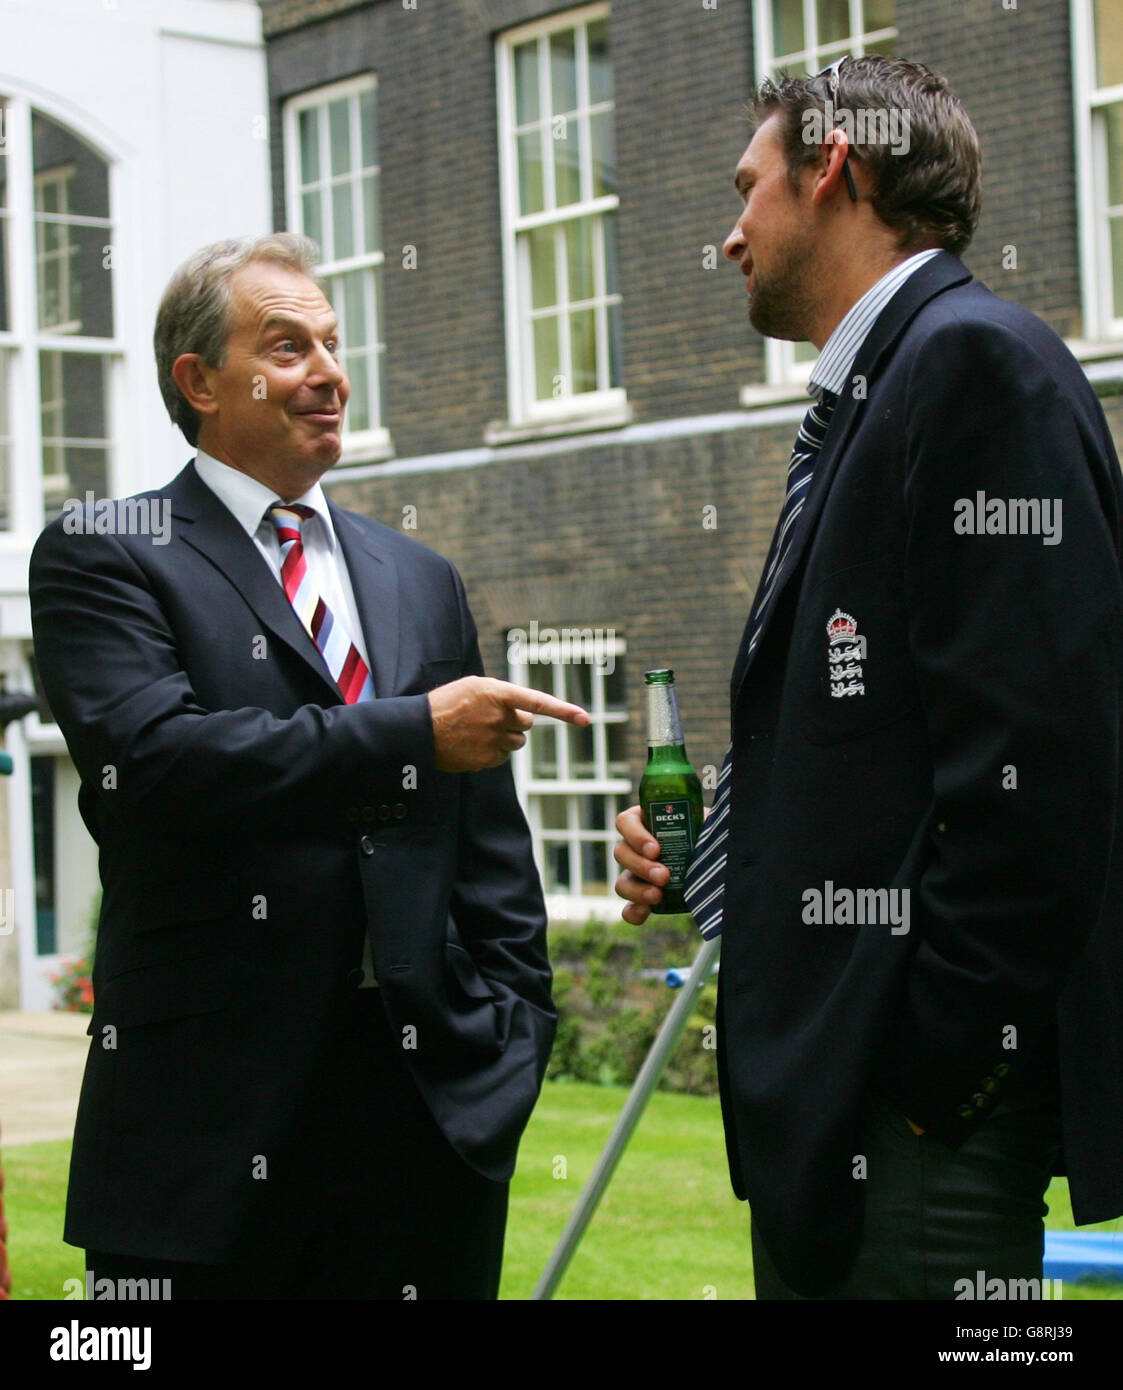 Britain's Prime Minister Tony Blair talks to Engand cricketer Steve Harmison during a reception at Downing Street in central London, Tuesday 13 September 2005 in honour of the England cricket team who beat Australia in a five-match series to regain the Ashes. Tens of thousands of England cricket fans lined the streets of London on today to congratulate their team after England's first Ashes triumph over Australia for almost two decades. See PA Story SPORT Ashes. PRESS ASSOCIATION Photo. Photo credit should read: Mike Finn-Kelcey/PA/WPA Pool/Reuters Stock Photo